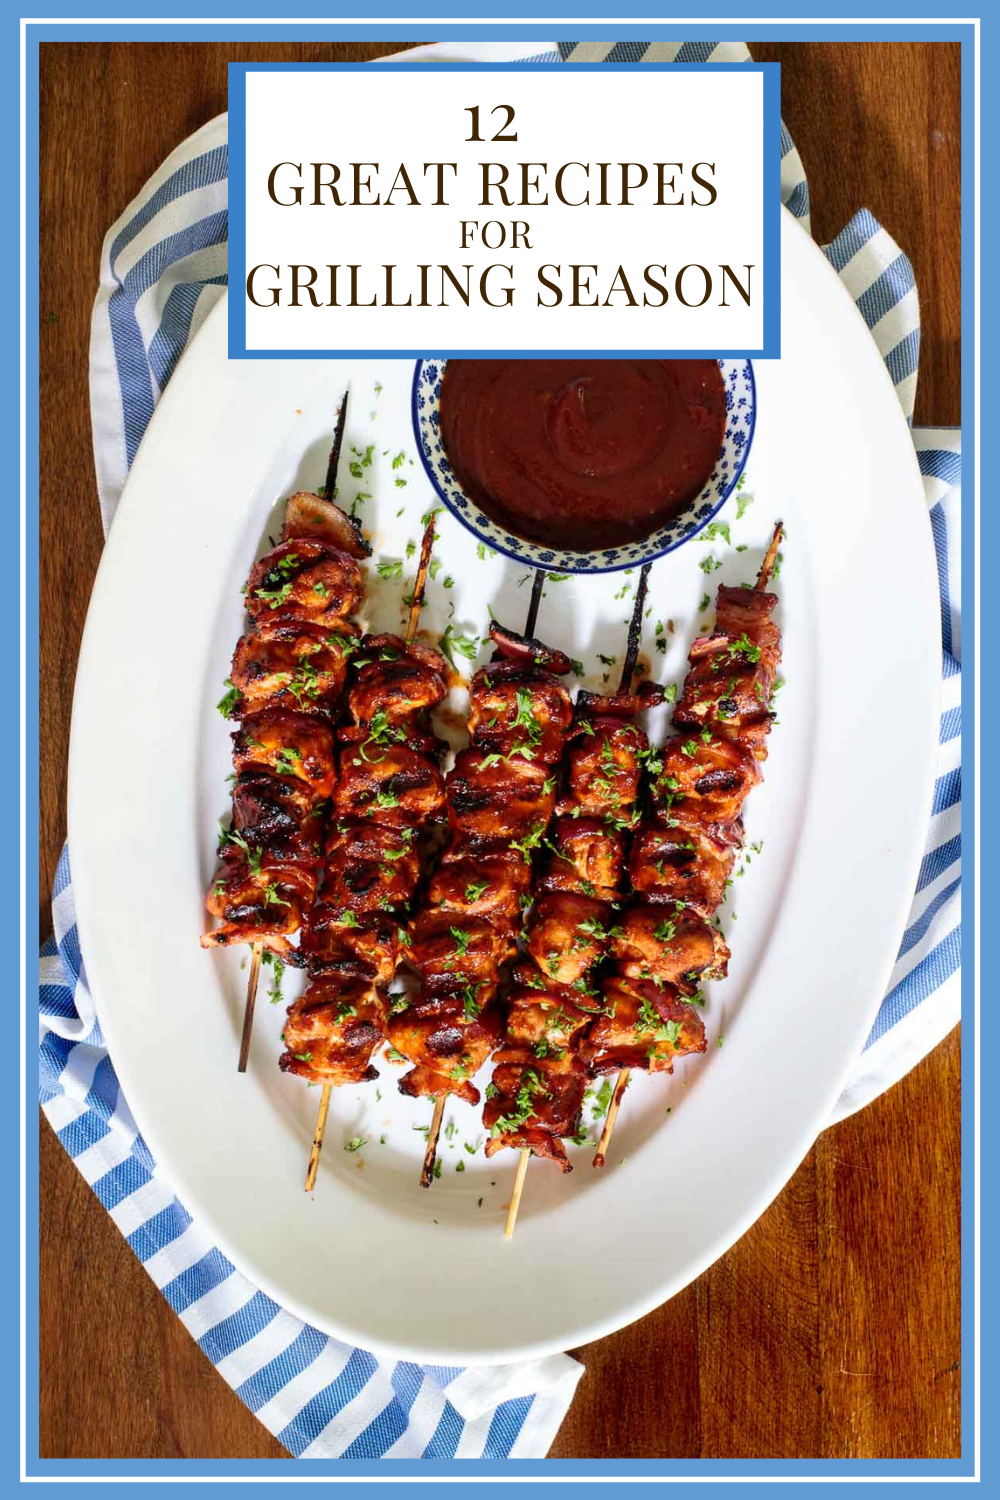 Great on the Grill - 12 Fabulous Recipes for Grilling Season